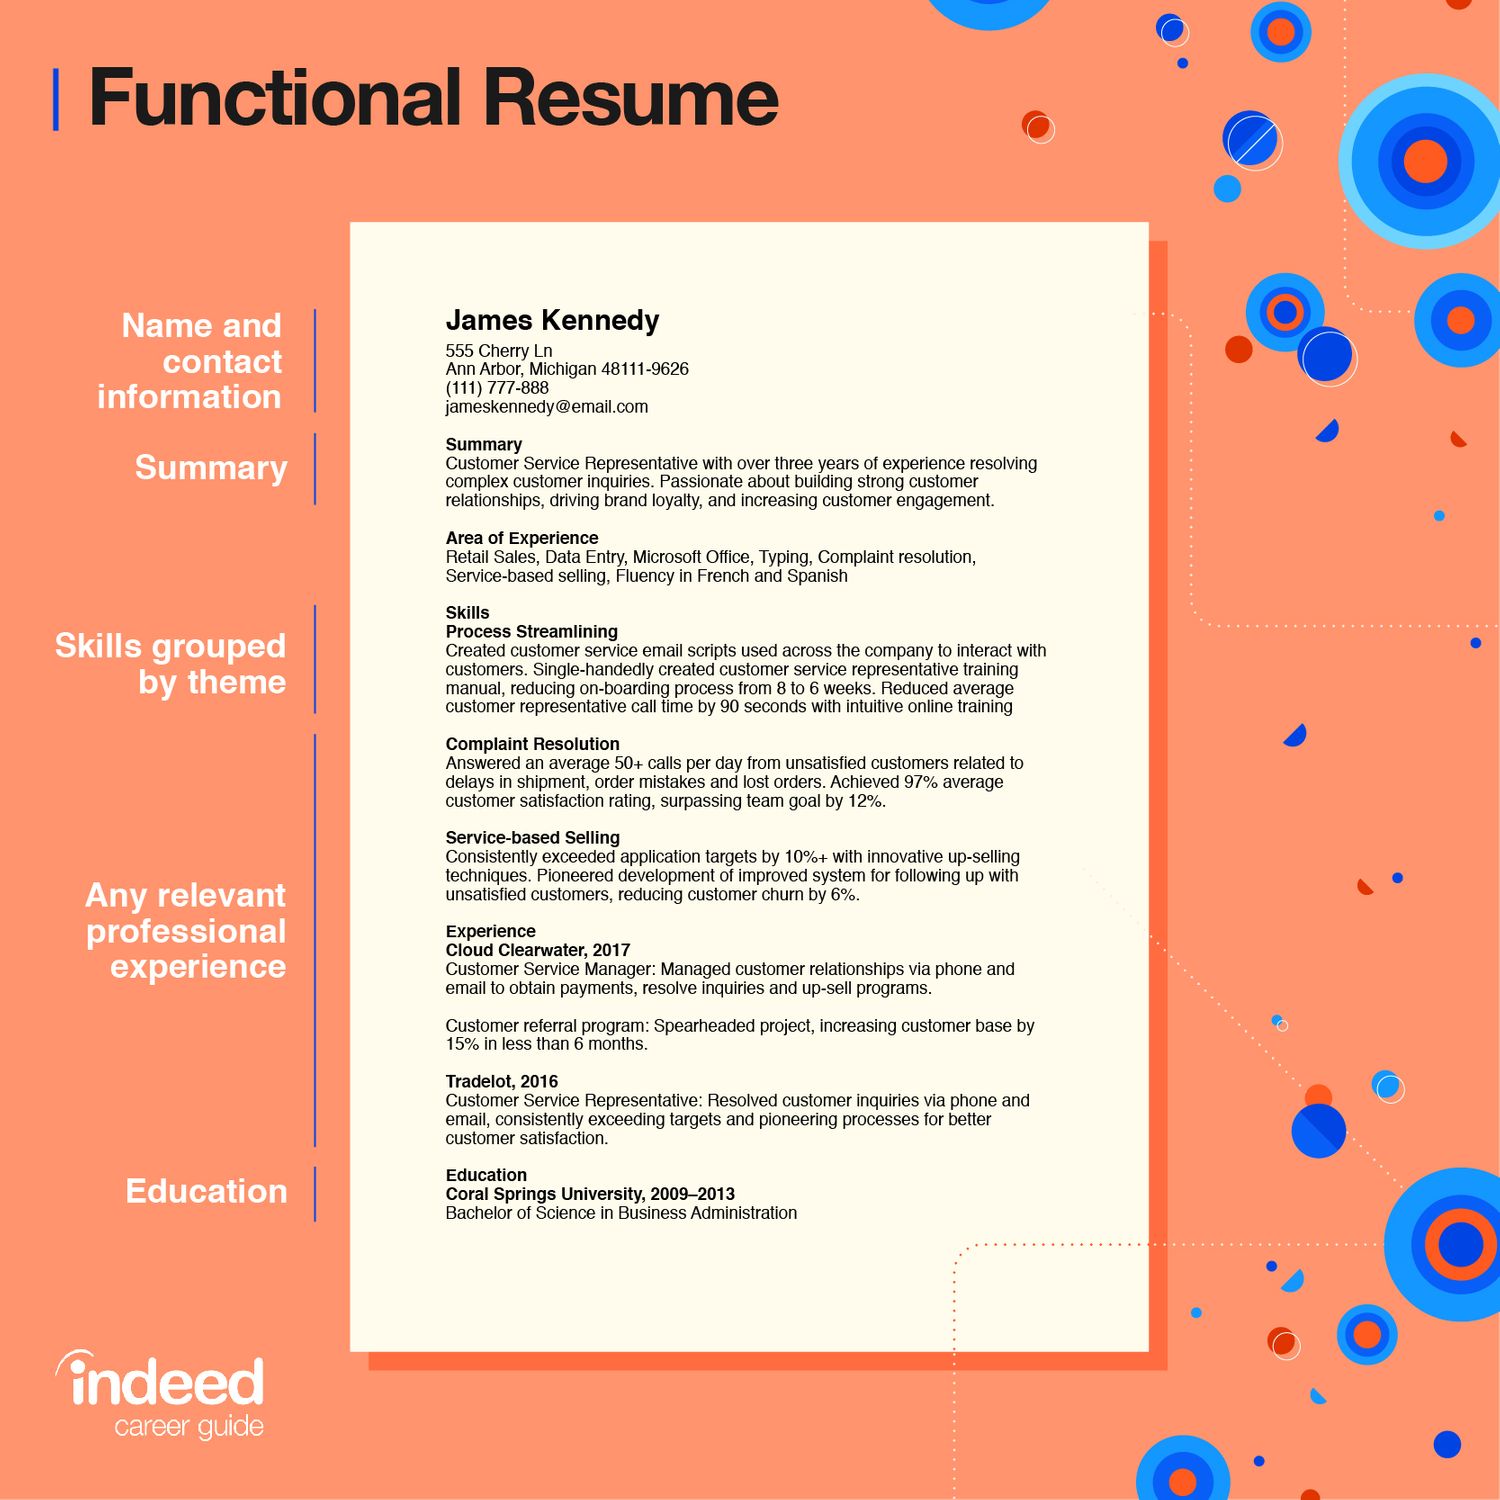 Evaluate the length of your resume and consider removing any unnecessary information to keep it concise and focused.
Assess the readability of your resume by using appropriate font types and sizes.